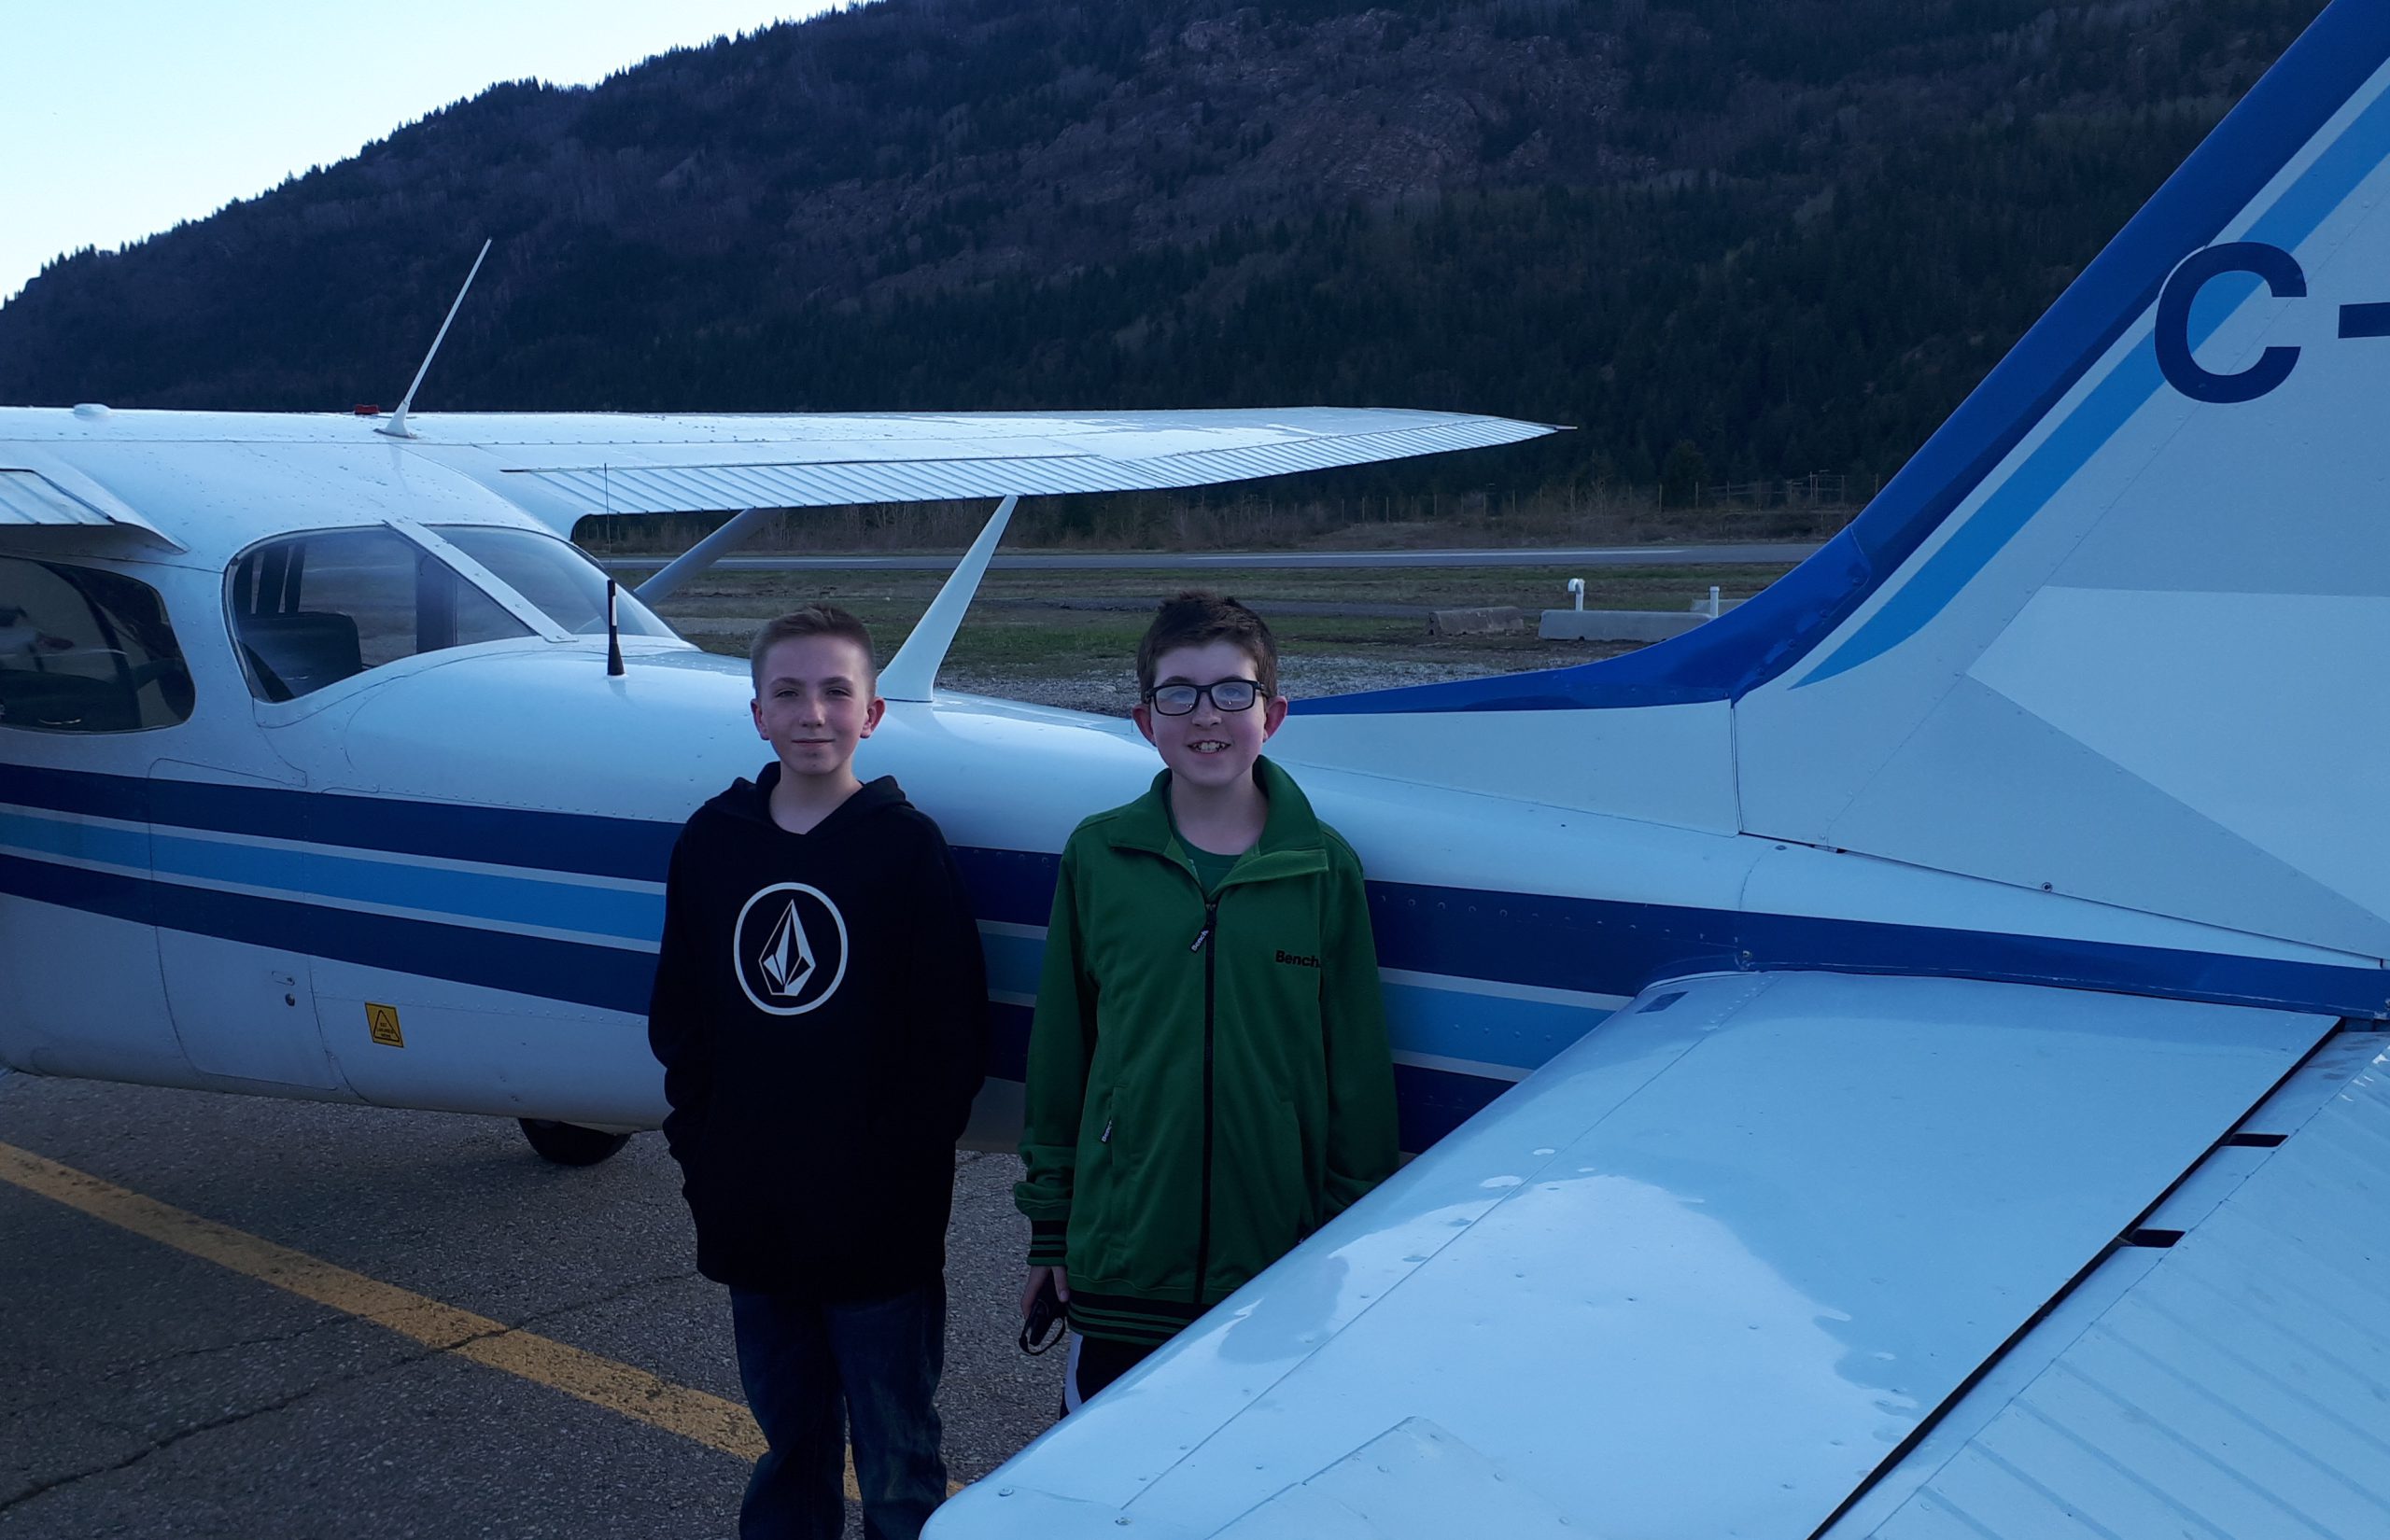 Trail cadets take to the skies